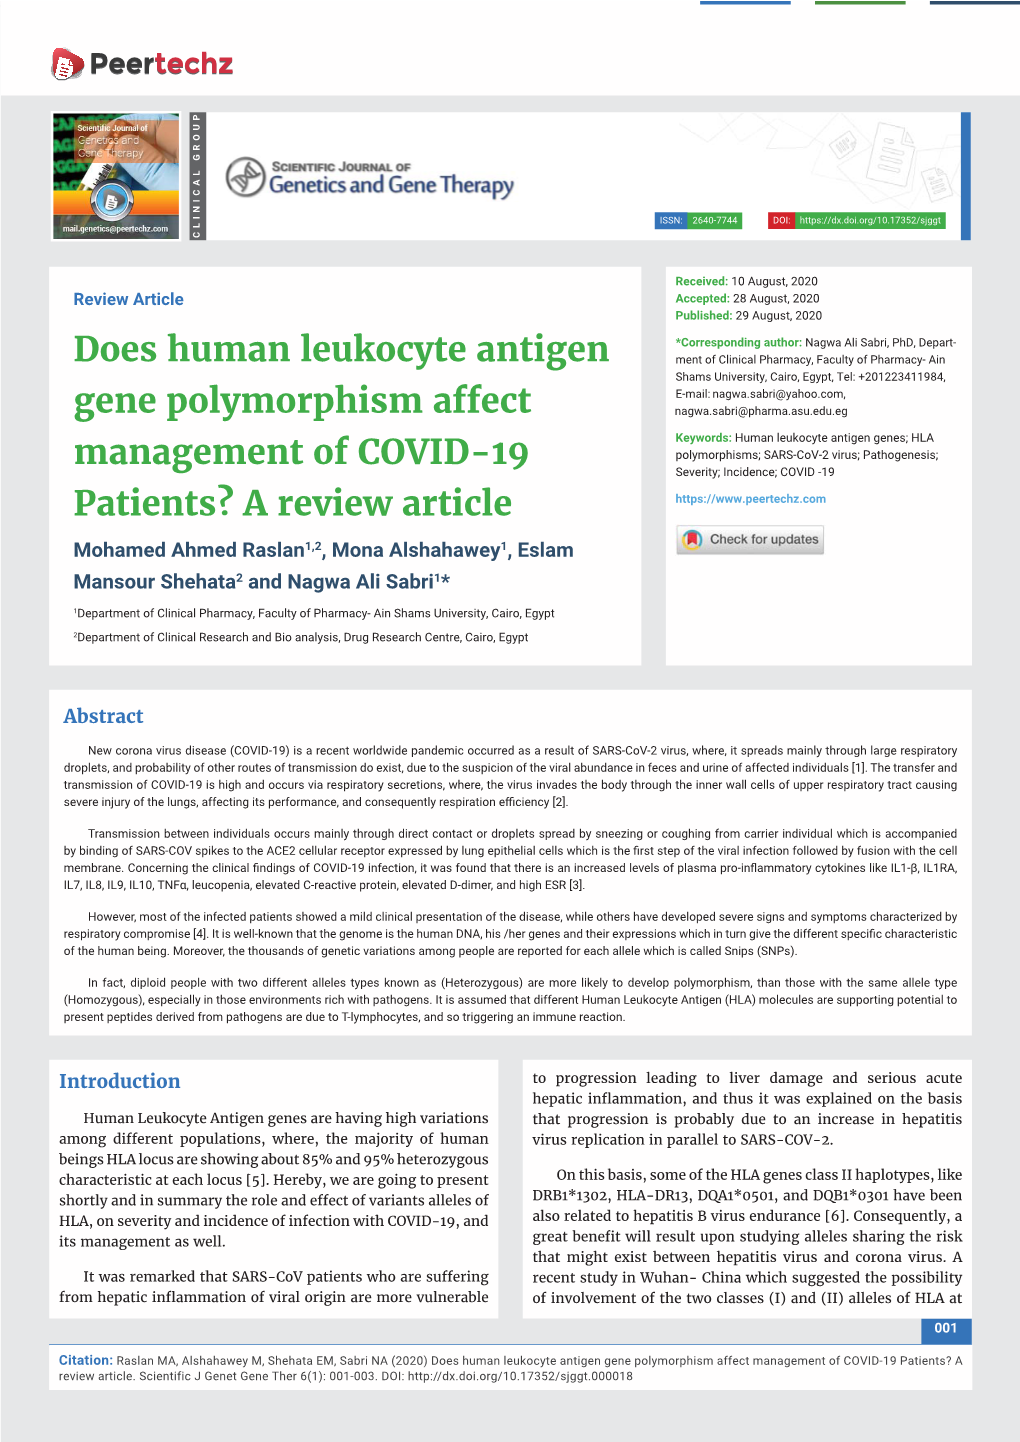 Does Human Leukocyte Antigen Gene Polymorphism Affect Management of COVID-19 Patients? a Review Article